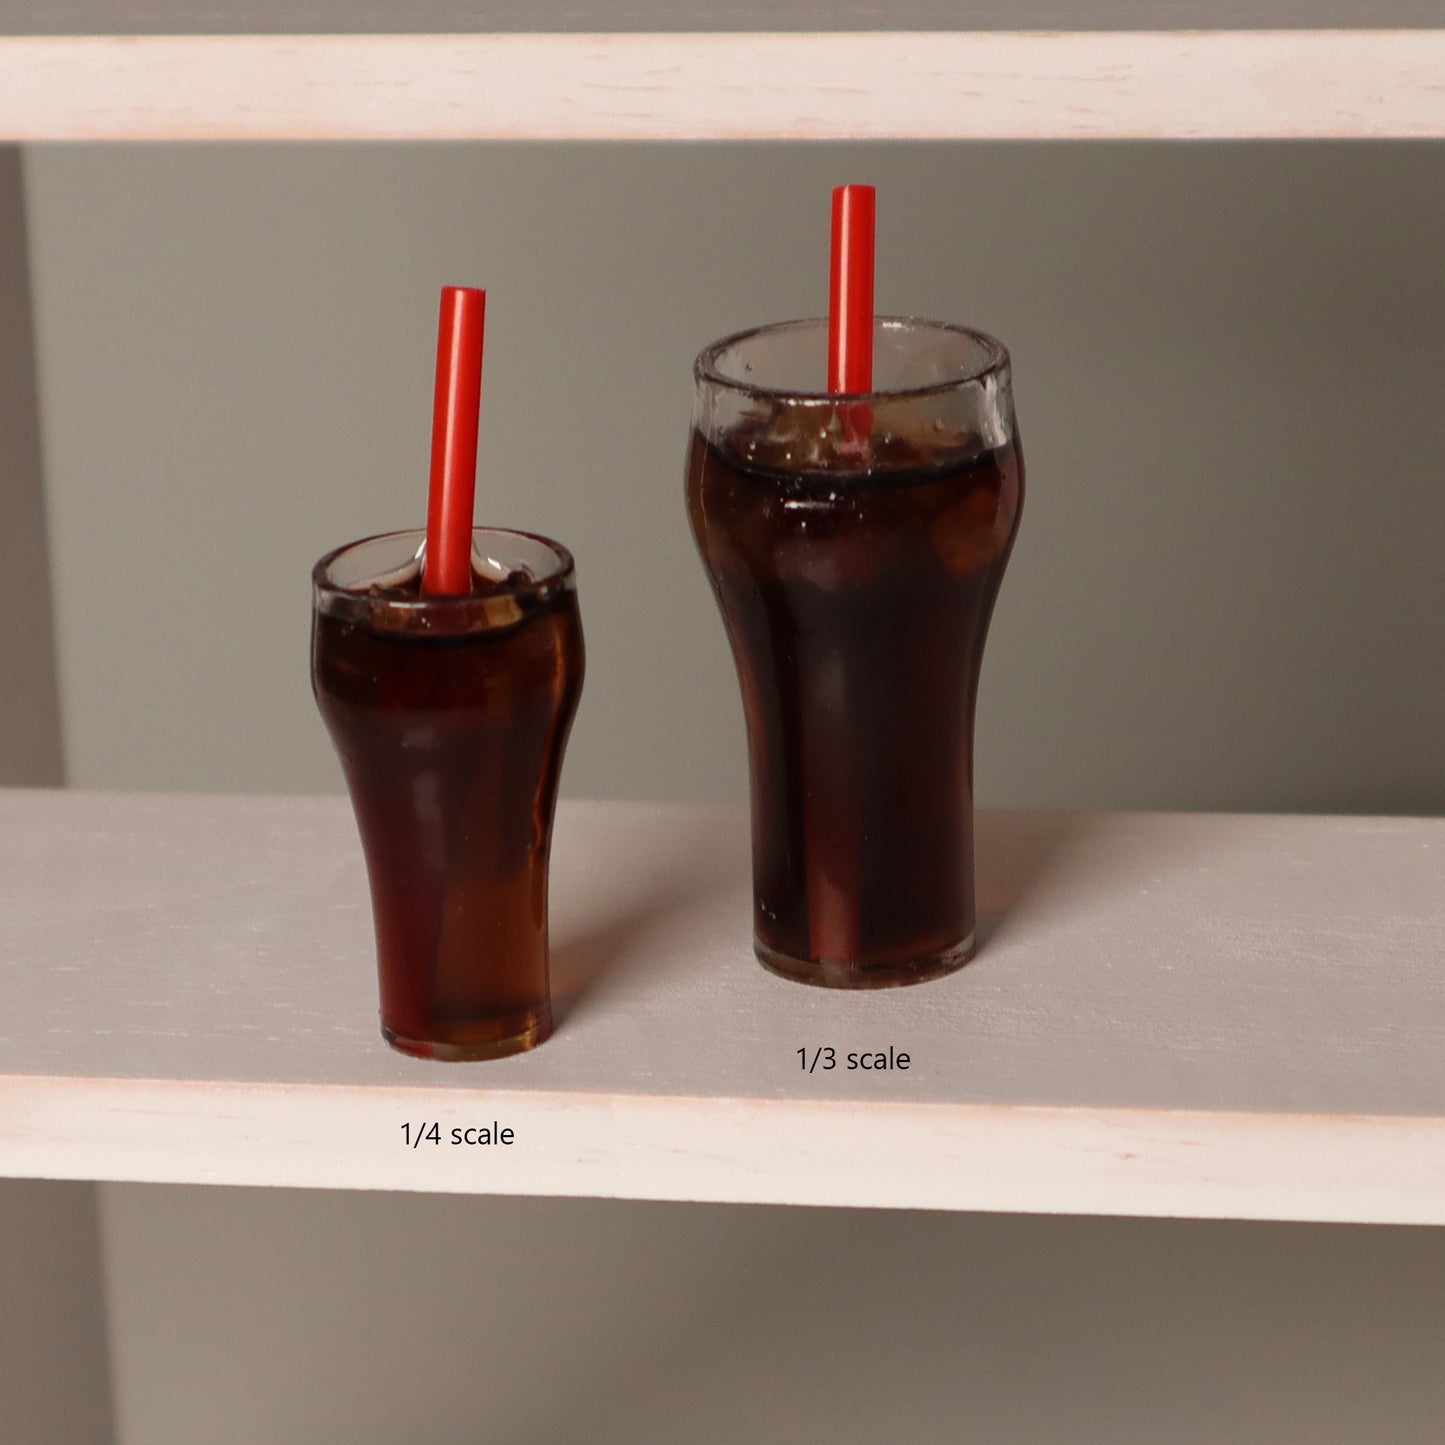 1/3 & 1/4 Scale Prop Set for BJD - Classic Cola Glass